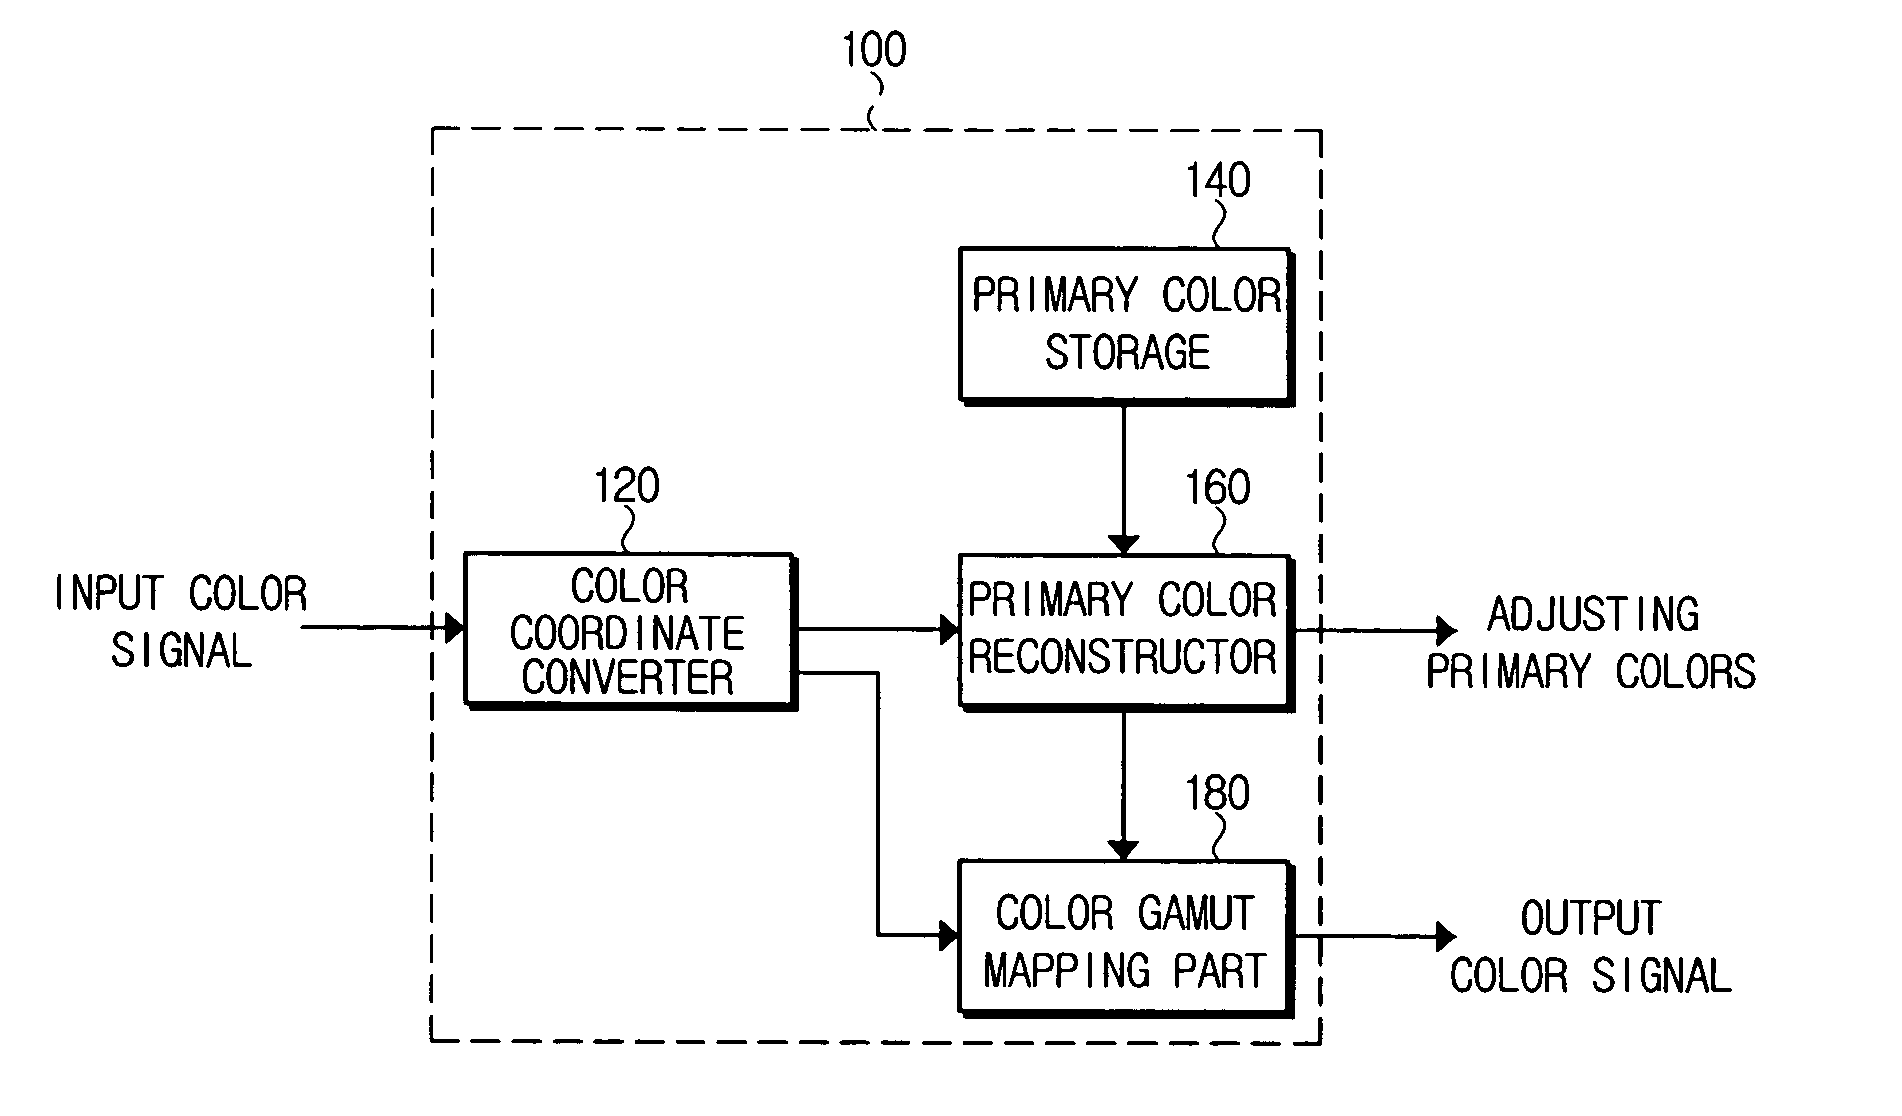 Color signal processing method and apparatus usable with a color reproducing device having a wide color gamut